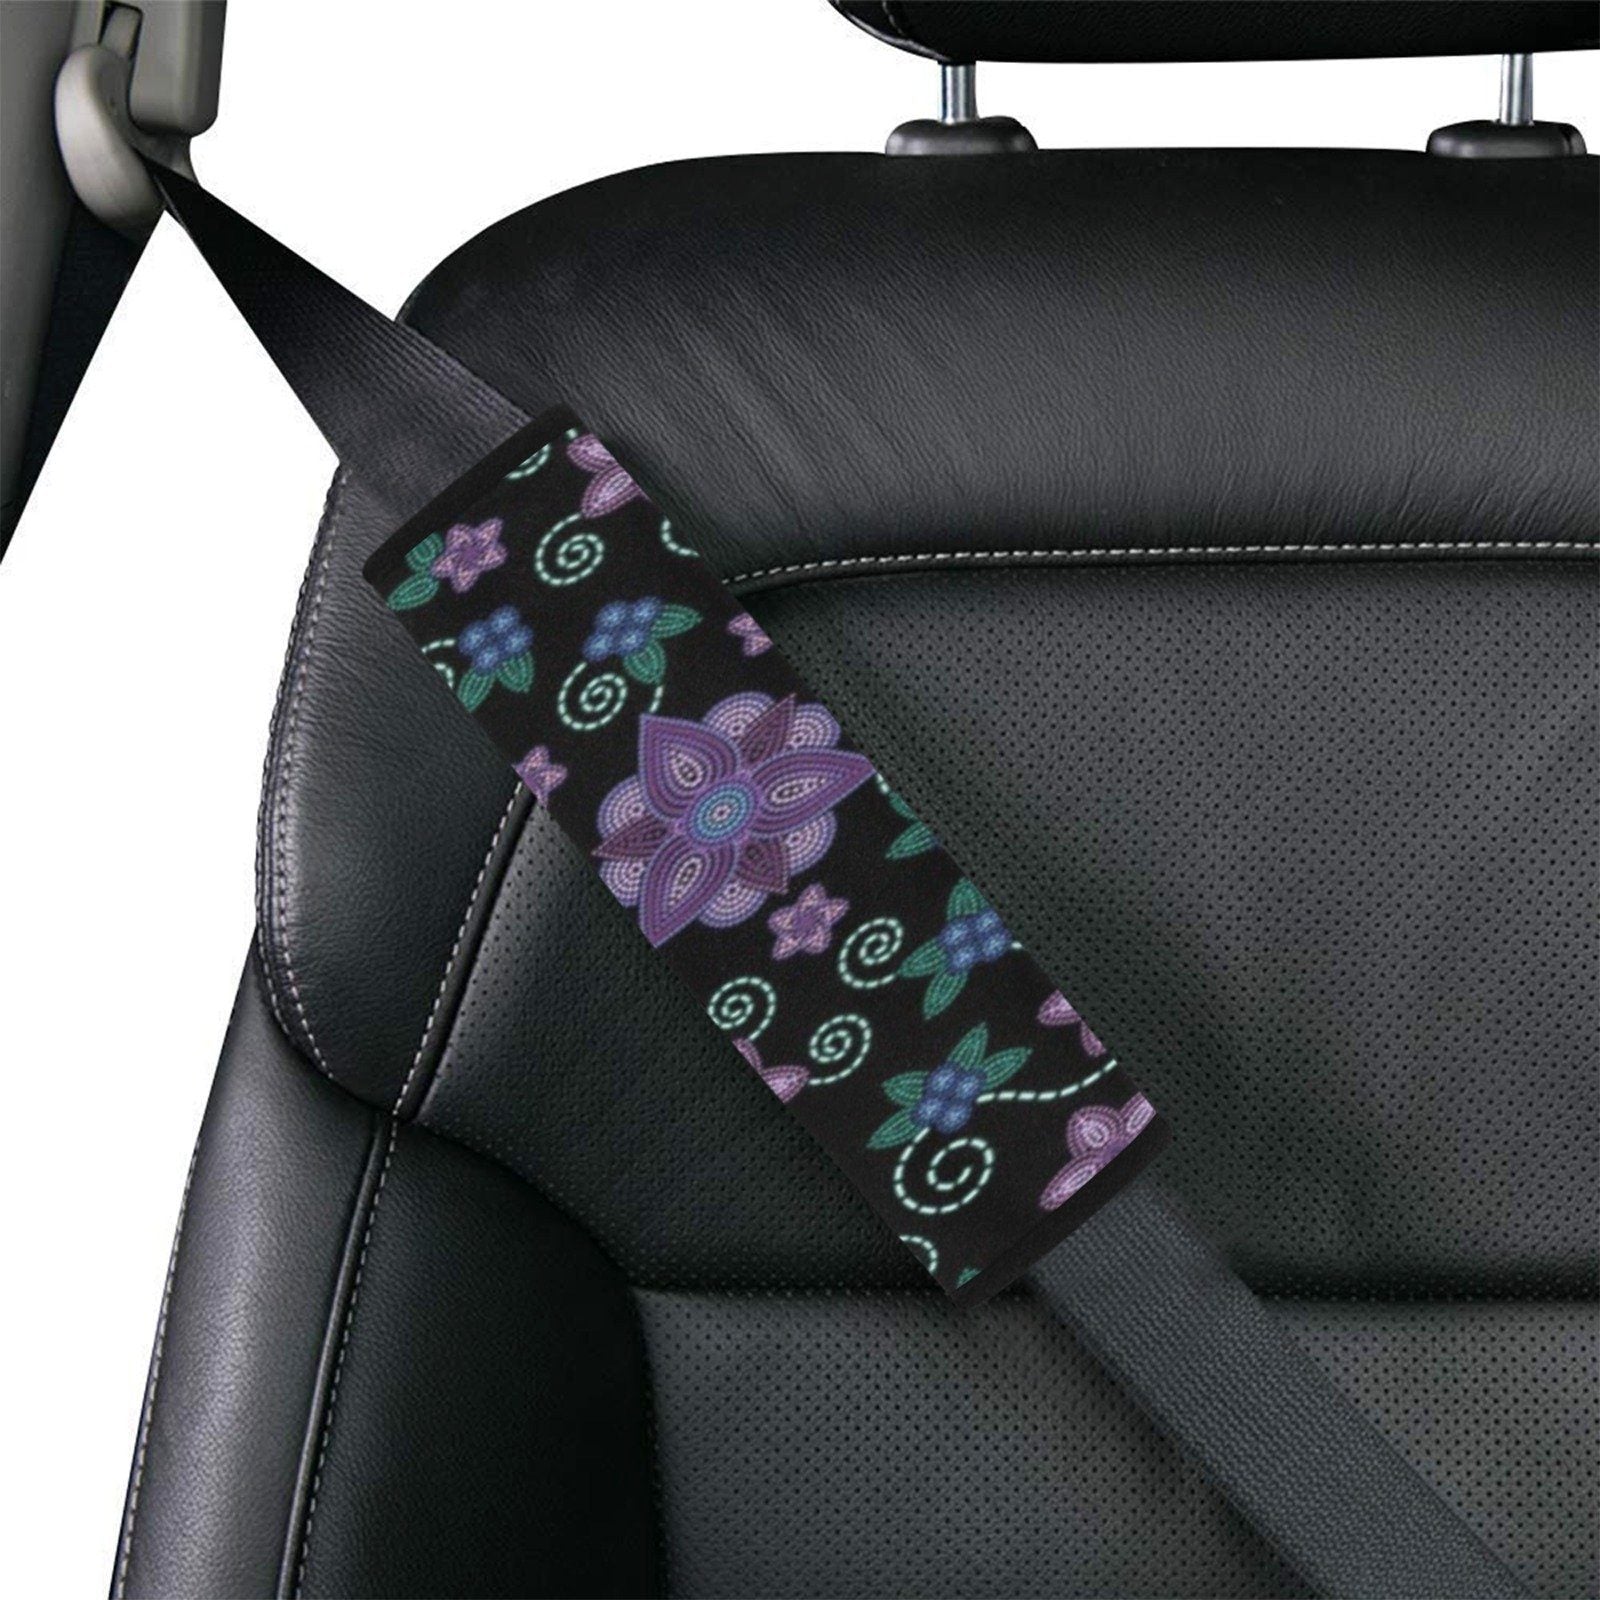 Berry Picking Car Seat Belt Cover 7''x12.6'' (Pack of 2) Car Seat Belt Cover 7x12.6 (Pack of 2) e-joyer 